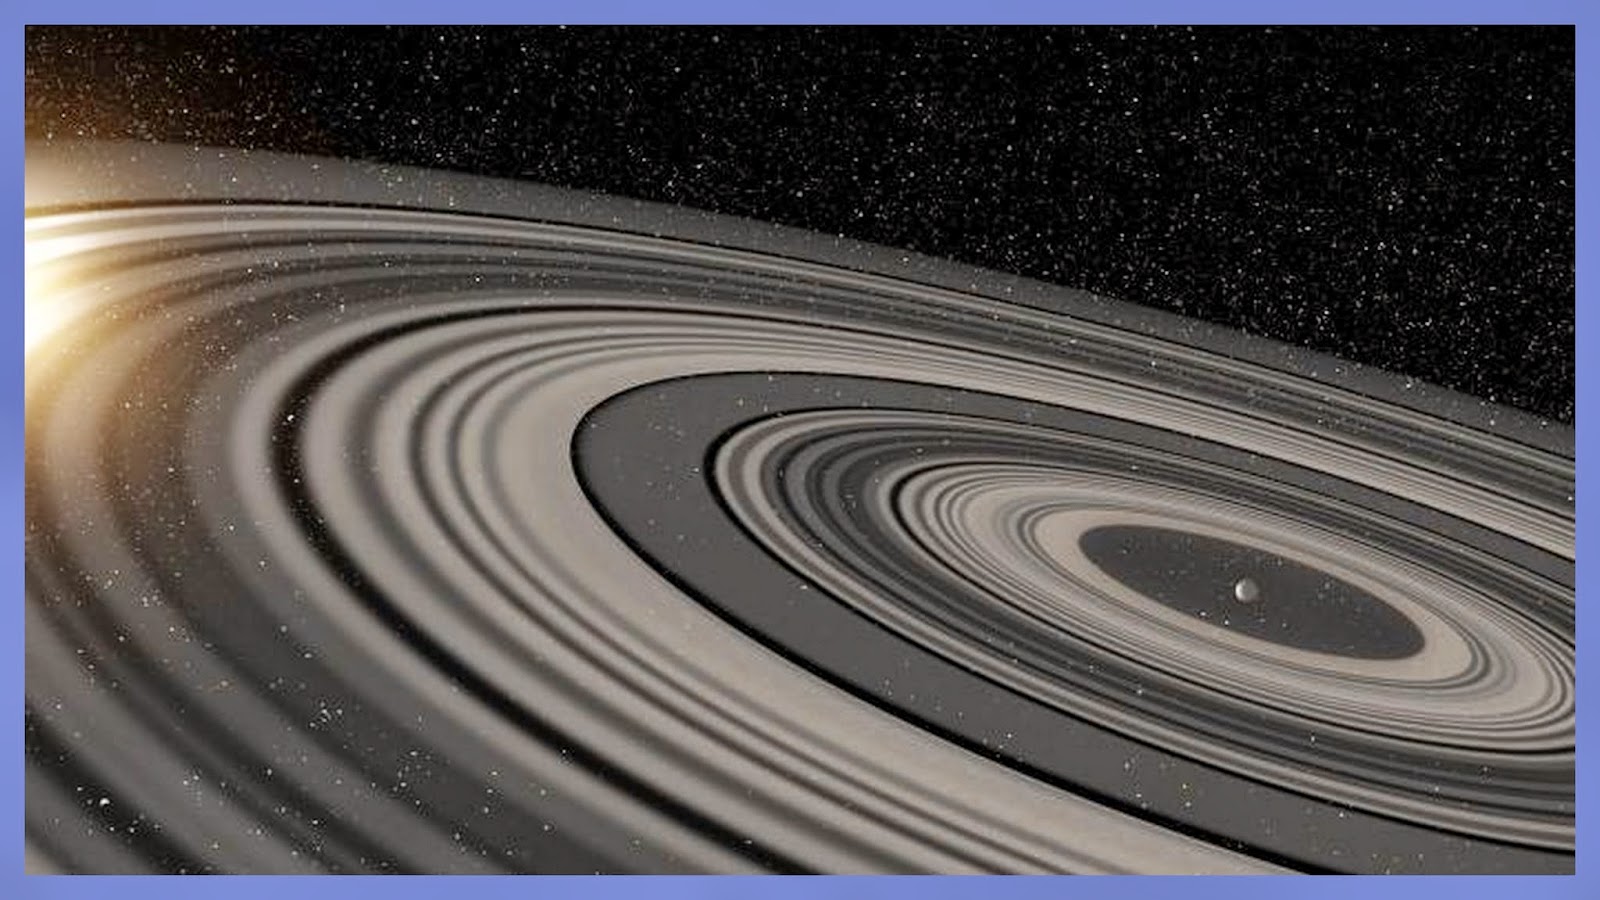 Re -Train Your Brain To Happiness: Planet J1407b: Astronomers Discover Faraway Super World With Rings 200 Times Bigger Than Saturn